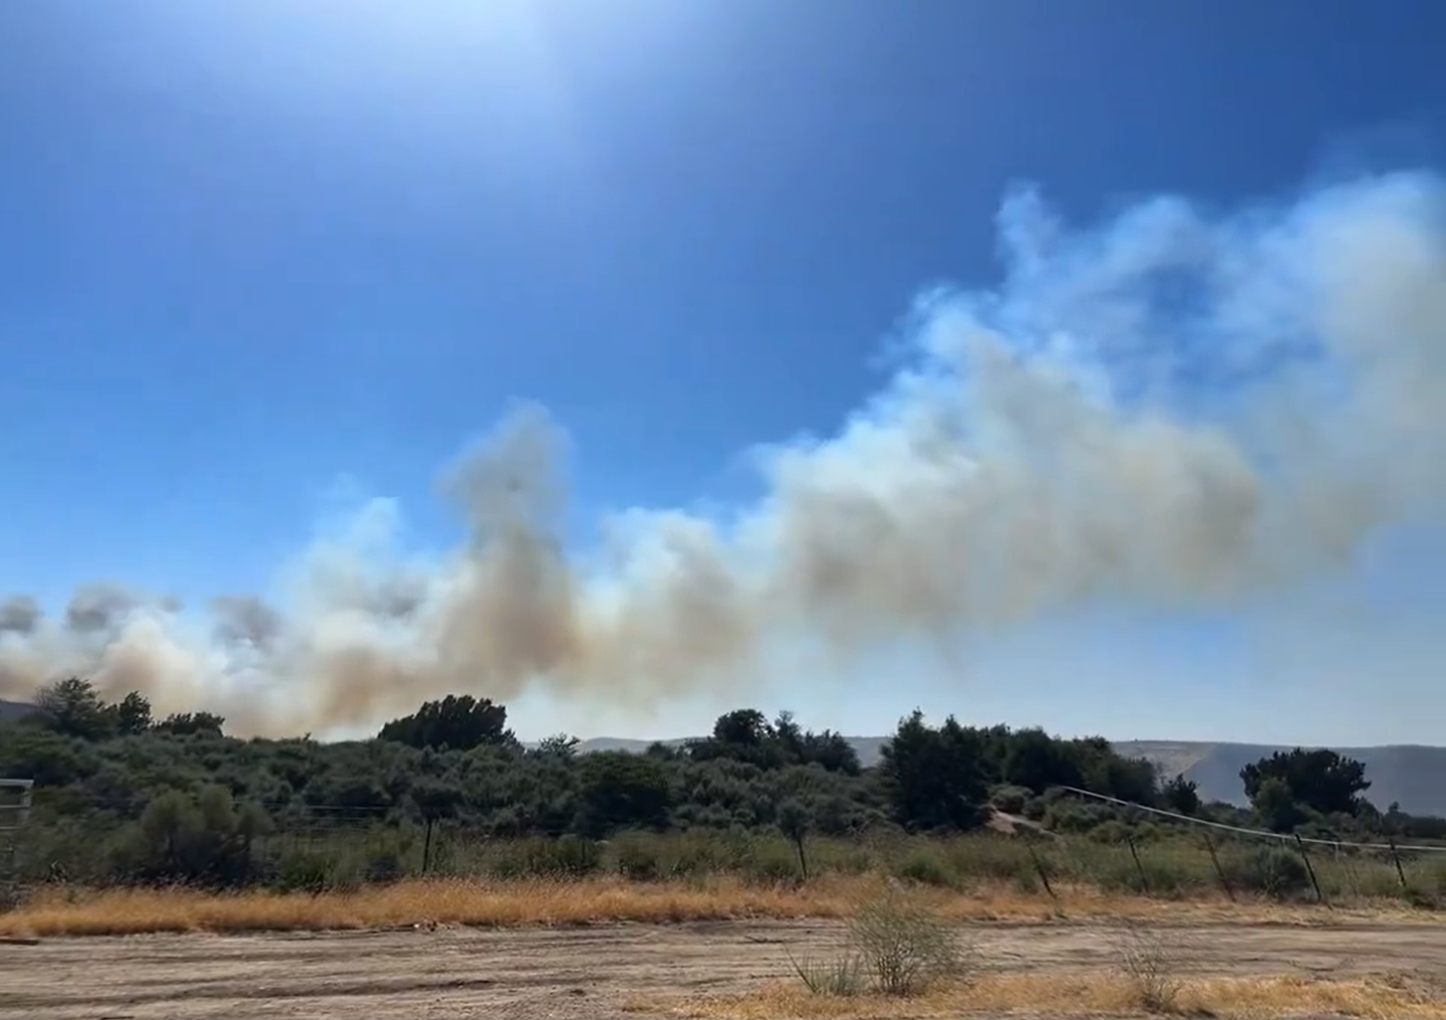 A photo of a fire with a big plume of smoke in the desert against a blue sky with trees and brush along a dirt road.